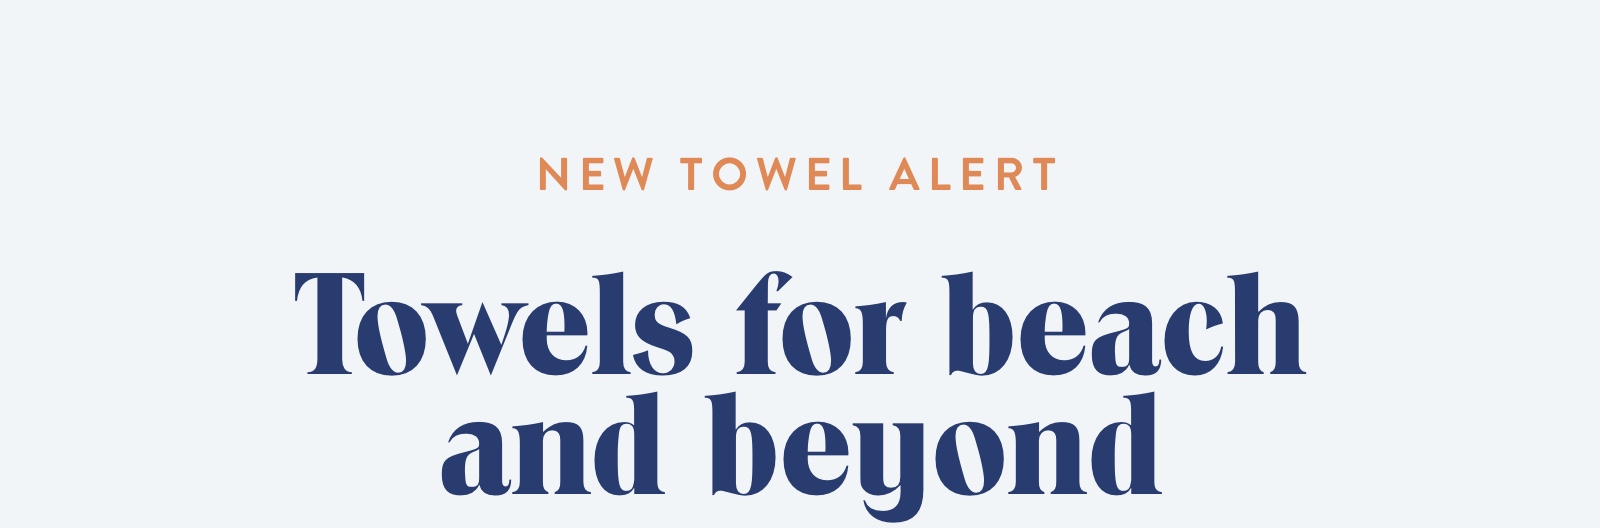 Towels for the beach and beyond